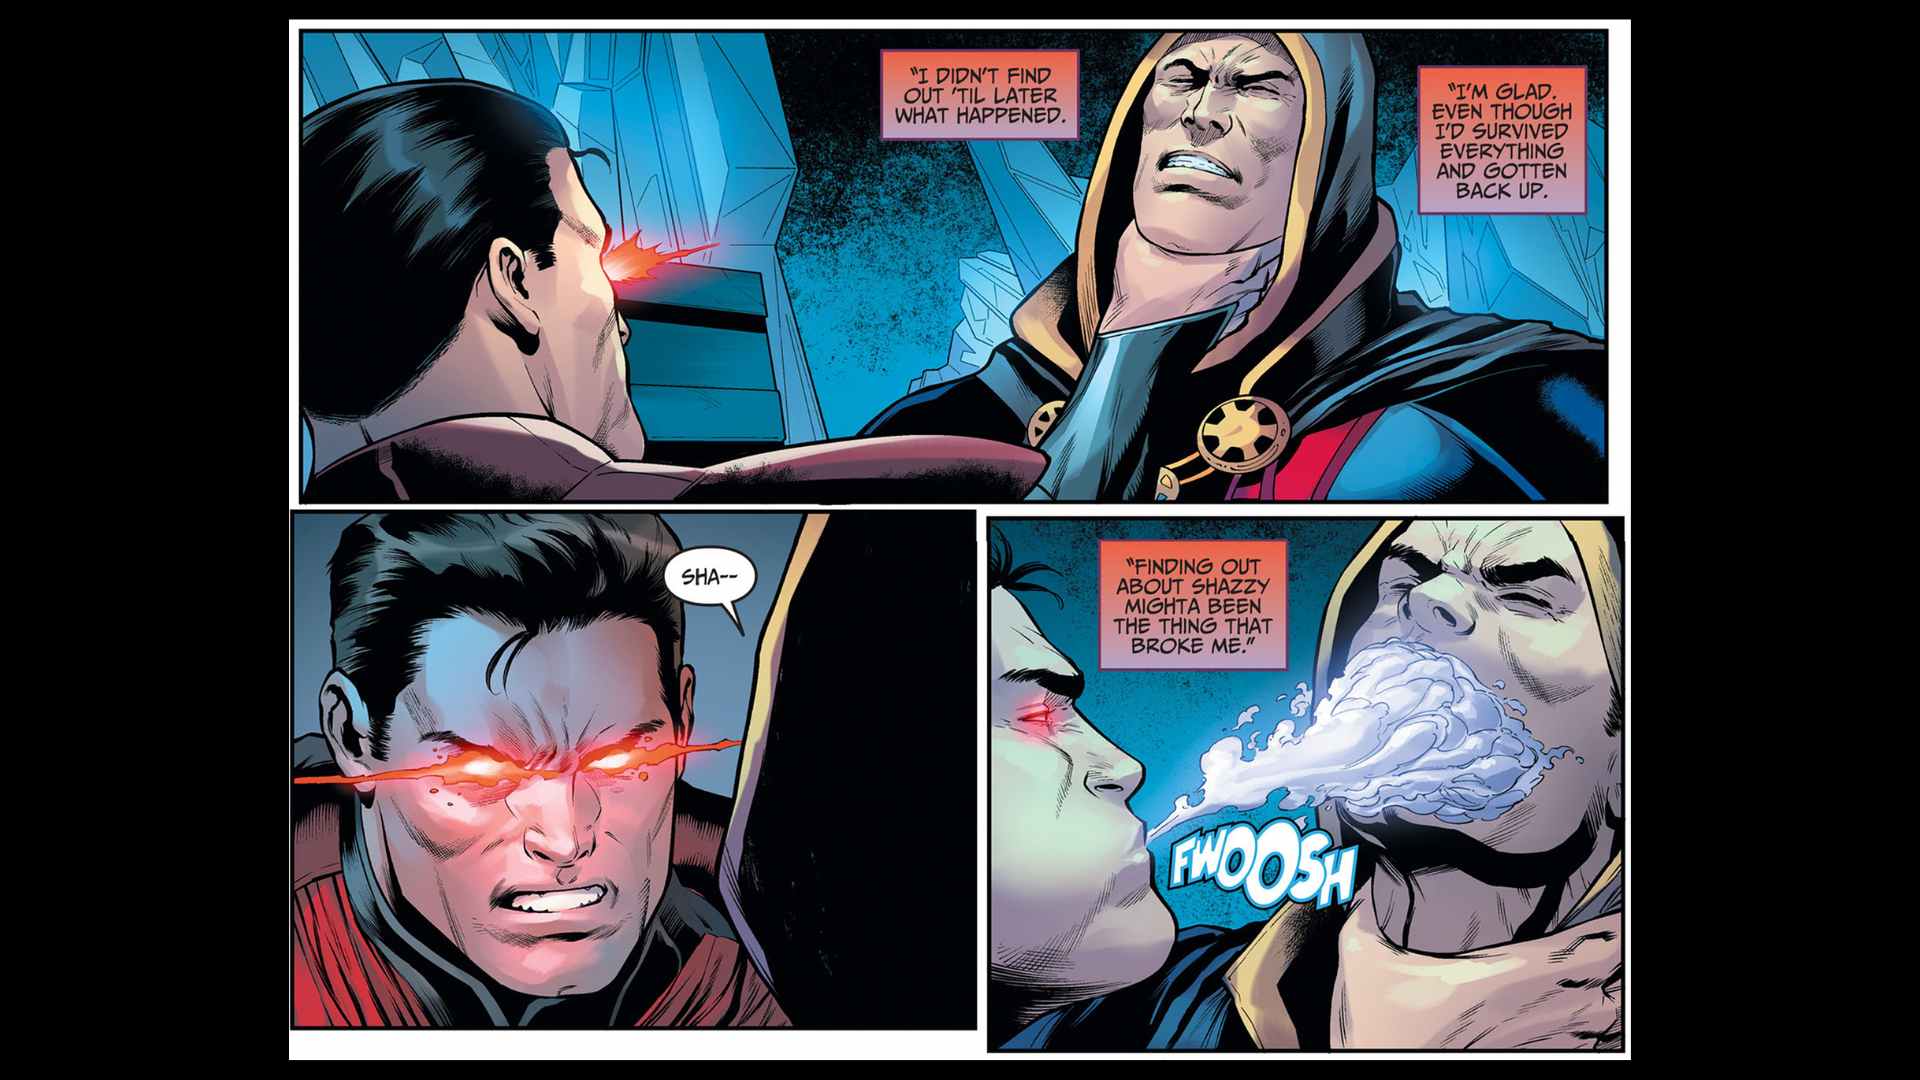 Injustice Superman as he's about to put Shazam's lights out